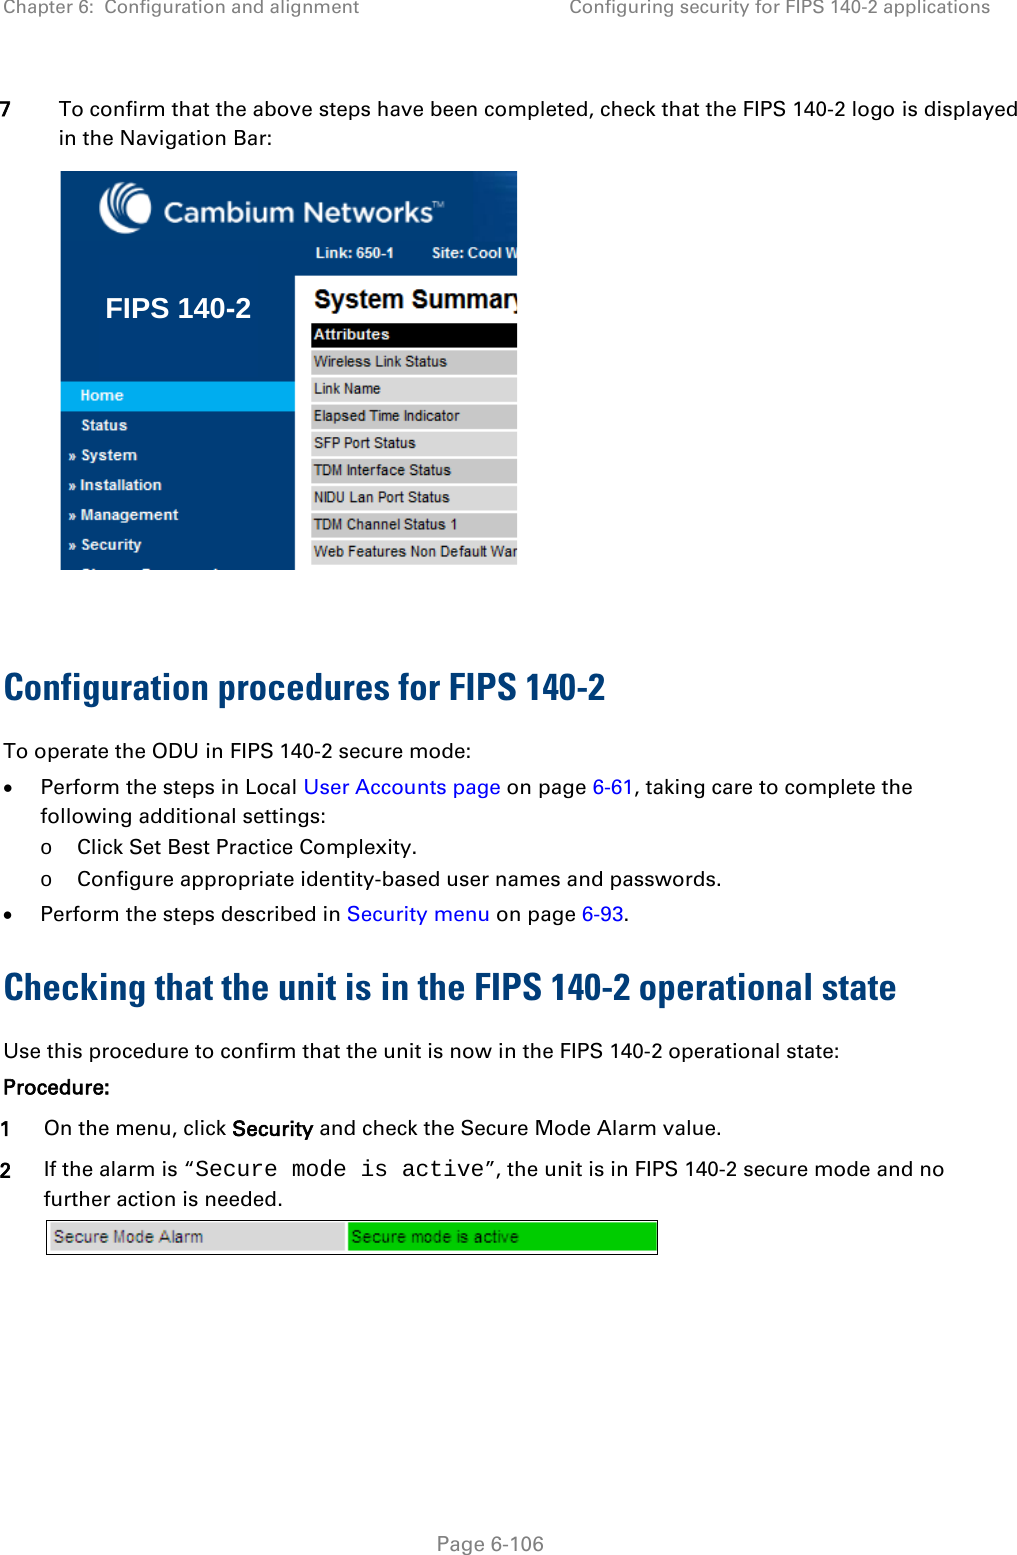 Chapter 6:  Configuration and alignment Configuring security for FIPS 140-2 applications  7 To confirm that the above steps have been completed, check that the FIPS 140-2 logo is displayed in the Navigation Bar:   Configuration procedures for FIPS 140-2 To operate the ODU in FIPS 140-2 secure mode: • Perform the steps in Local User Accounts page on page 6-61, taking care to complete the following additional settings: o Click Set Best Practice Complexity. o Configure appropriate identity-based user names and passwords. • Perform the steps described in Security menu on page 6-93. Checking that the unit is in the FIPS 140-2 operational state Use this procedure to confirm that the unit is now in the FIPS 140-2 operational state: Procedure: 1 On the menu, click Security and check the Secure Mode Alarm value. 2 If the alarm is “Secure mode is active”, the unit is in FIPS 140-2 secure mode and no further action is needed.  FIPS 140-2 Page 6-106 